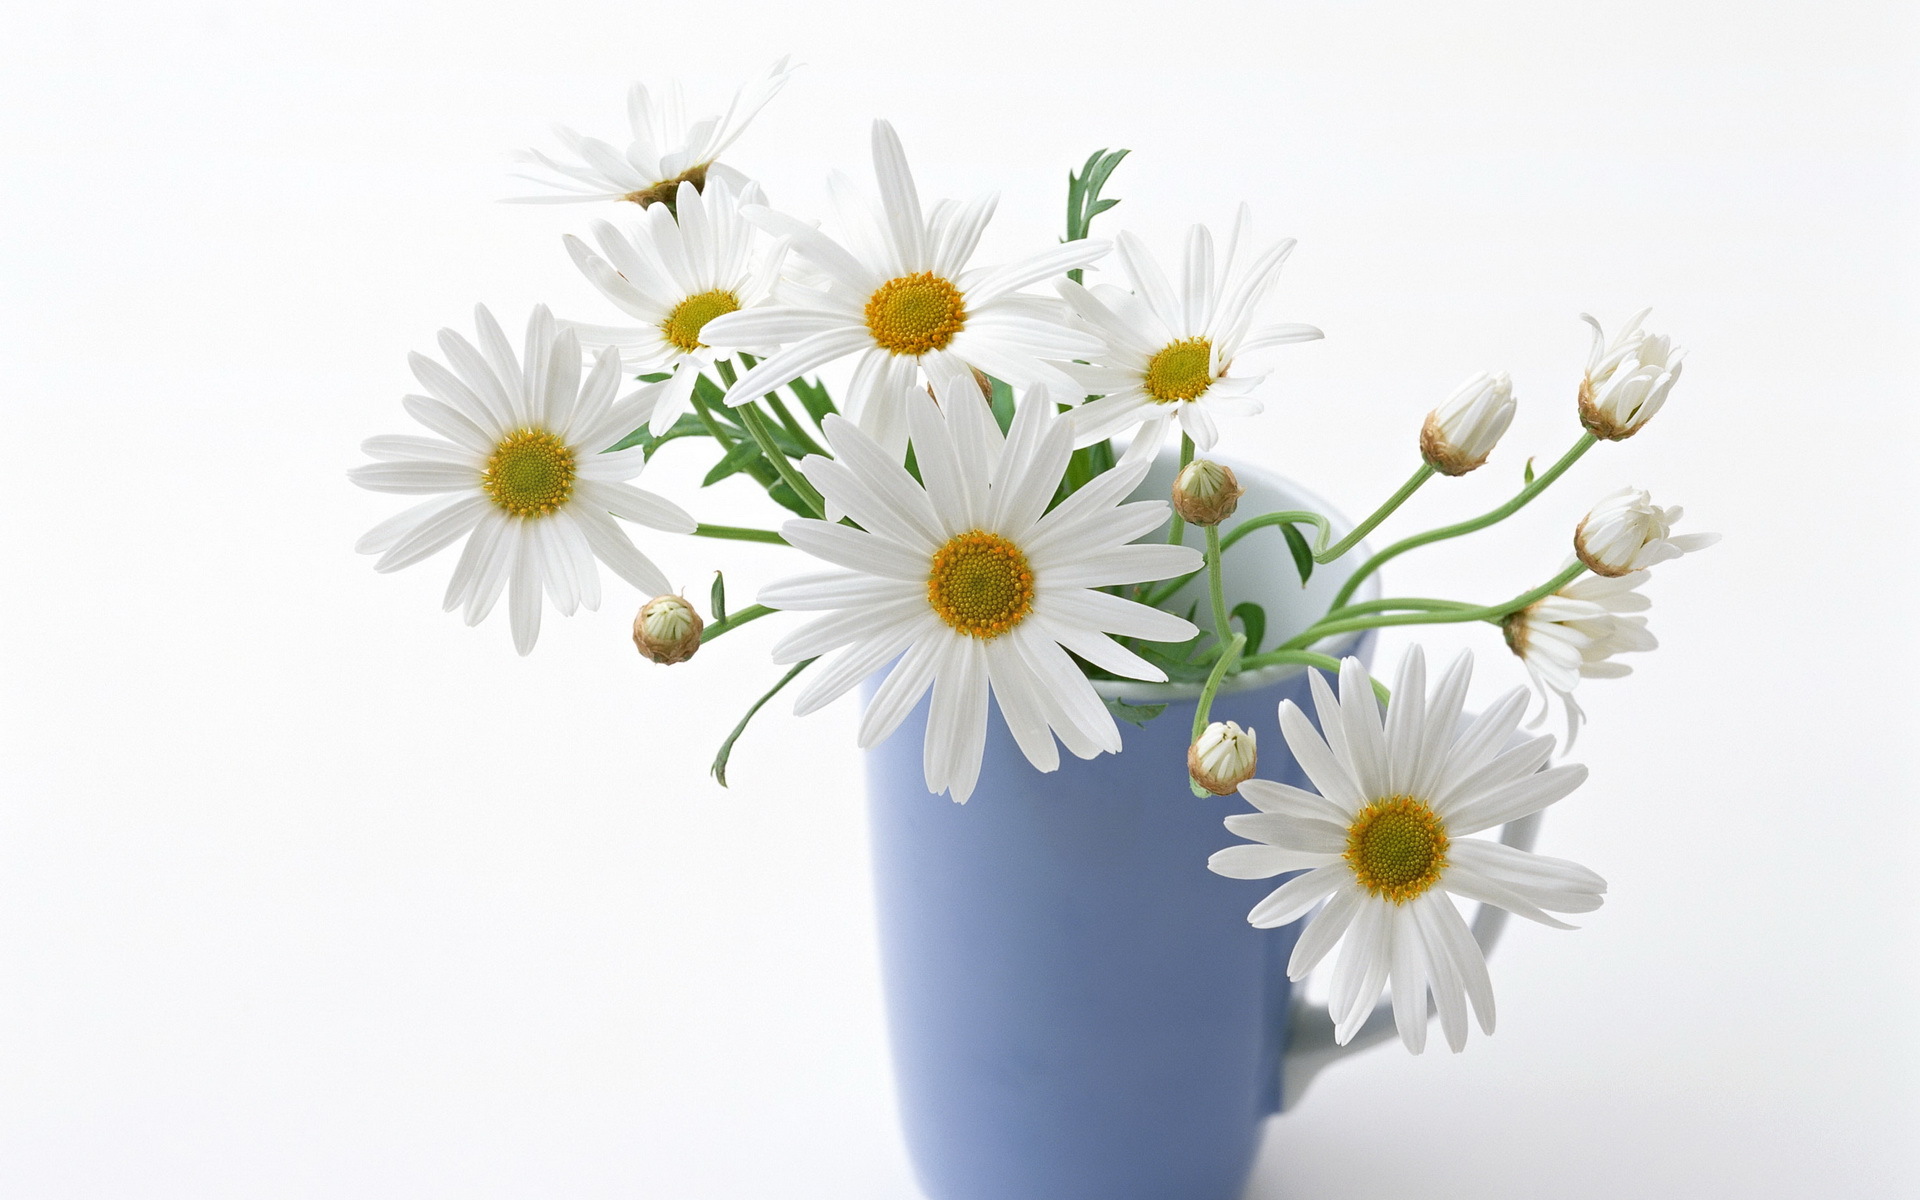 plants, bouquets, flowers, cups, camomile Full HD